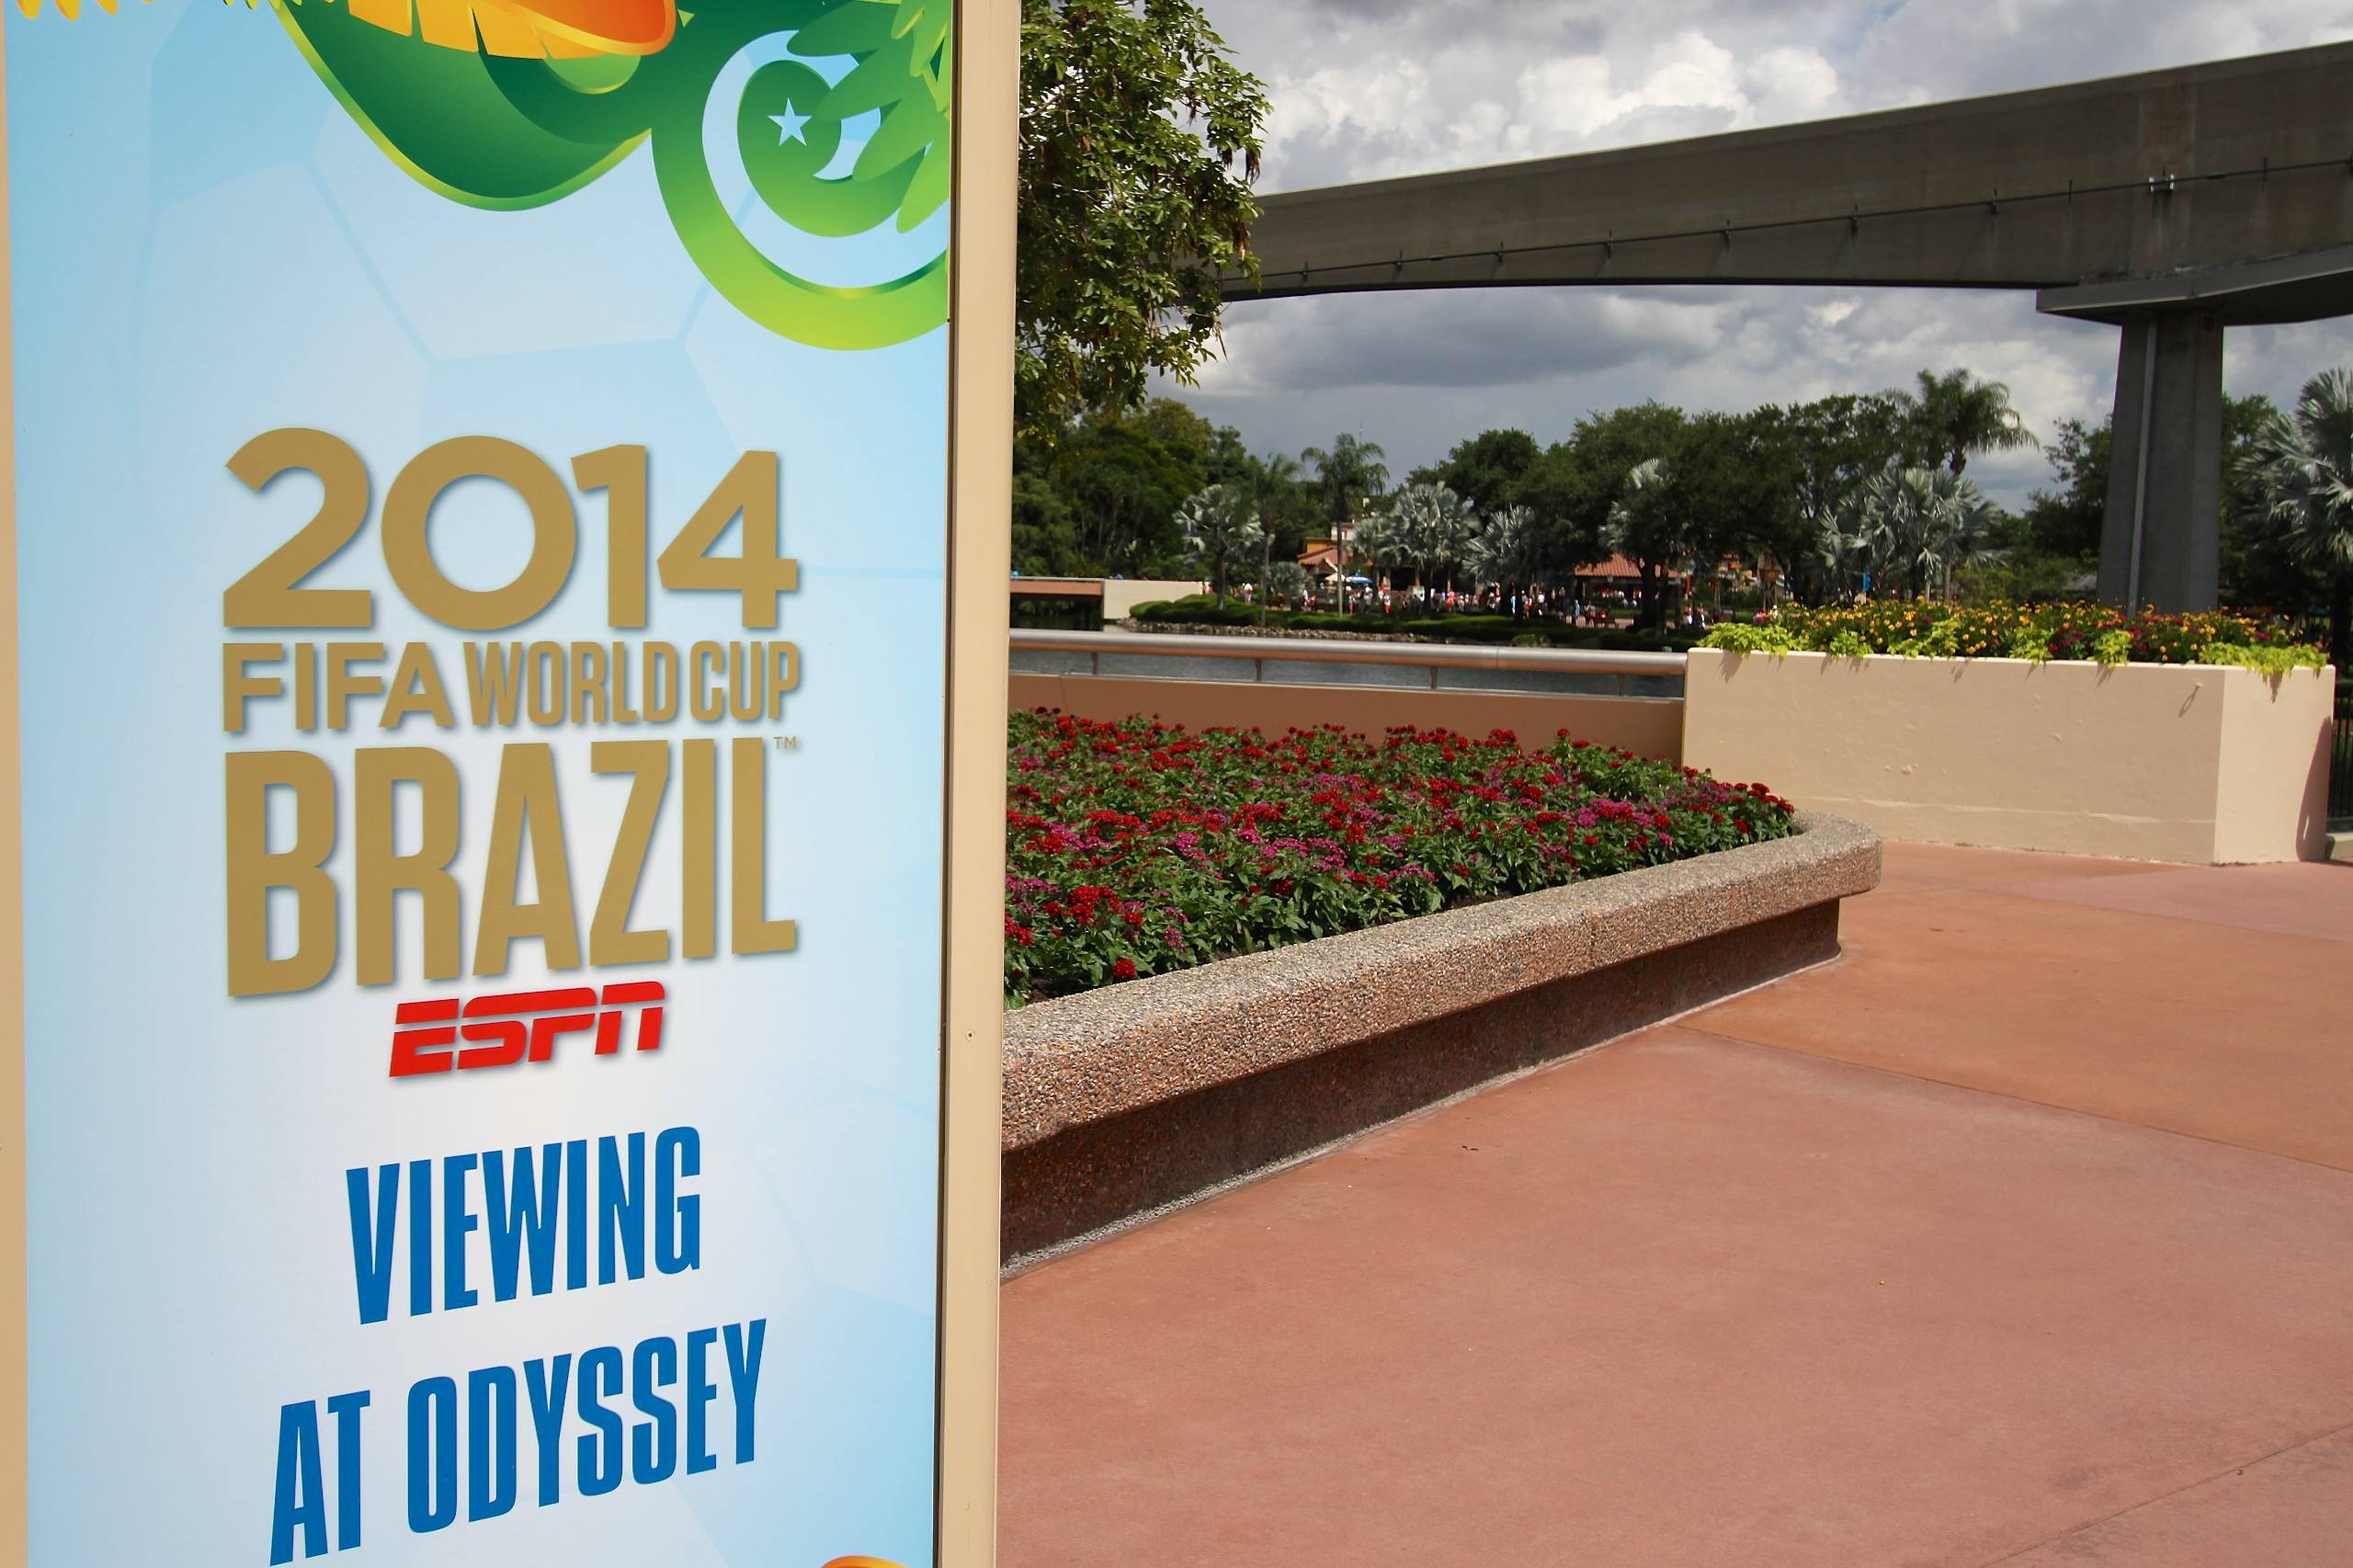 2014 FIFA World Cup at Epcot - Odyssey Viewing area sign